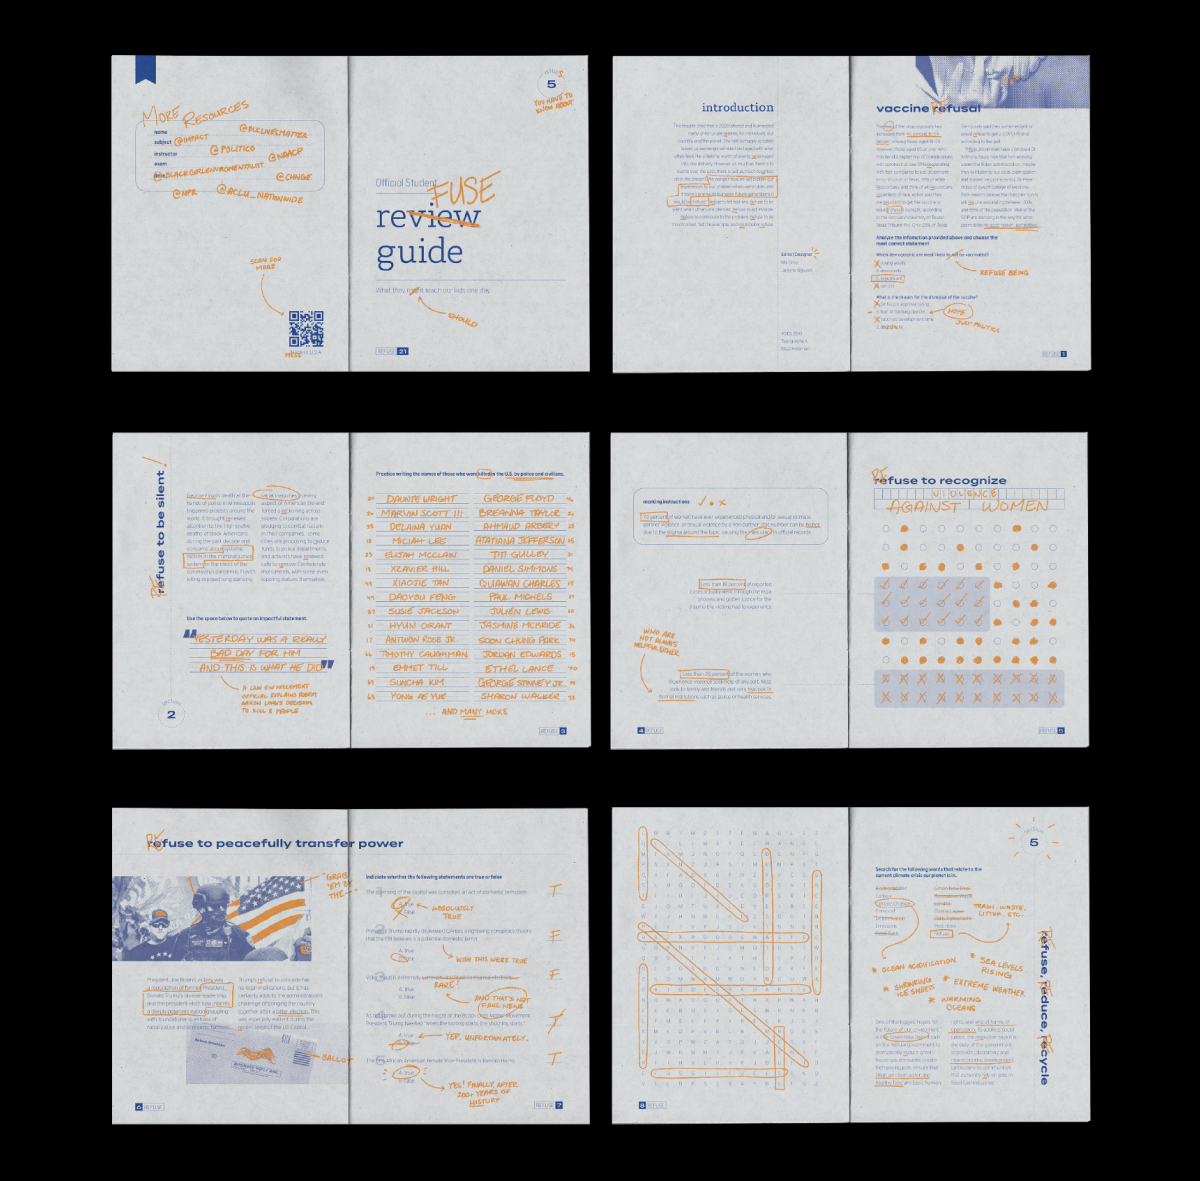 Image features a zine with blue pages, orange-yellow markers and dark blue typography. Pages have different renditions of textbook exercises.